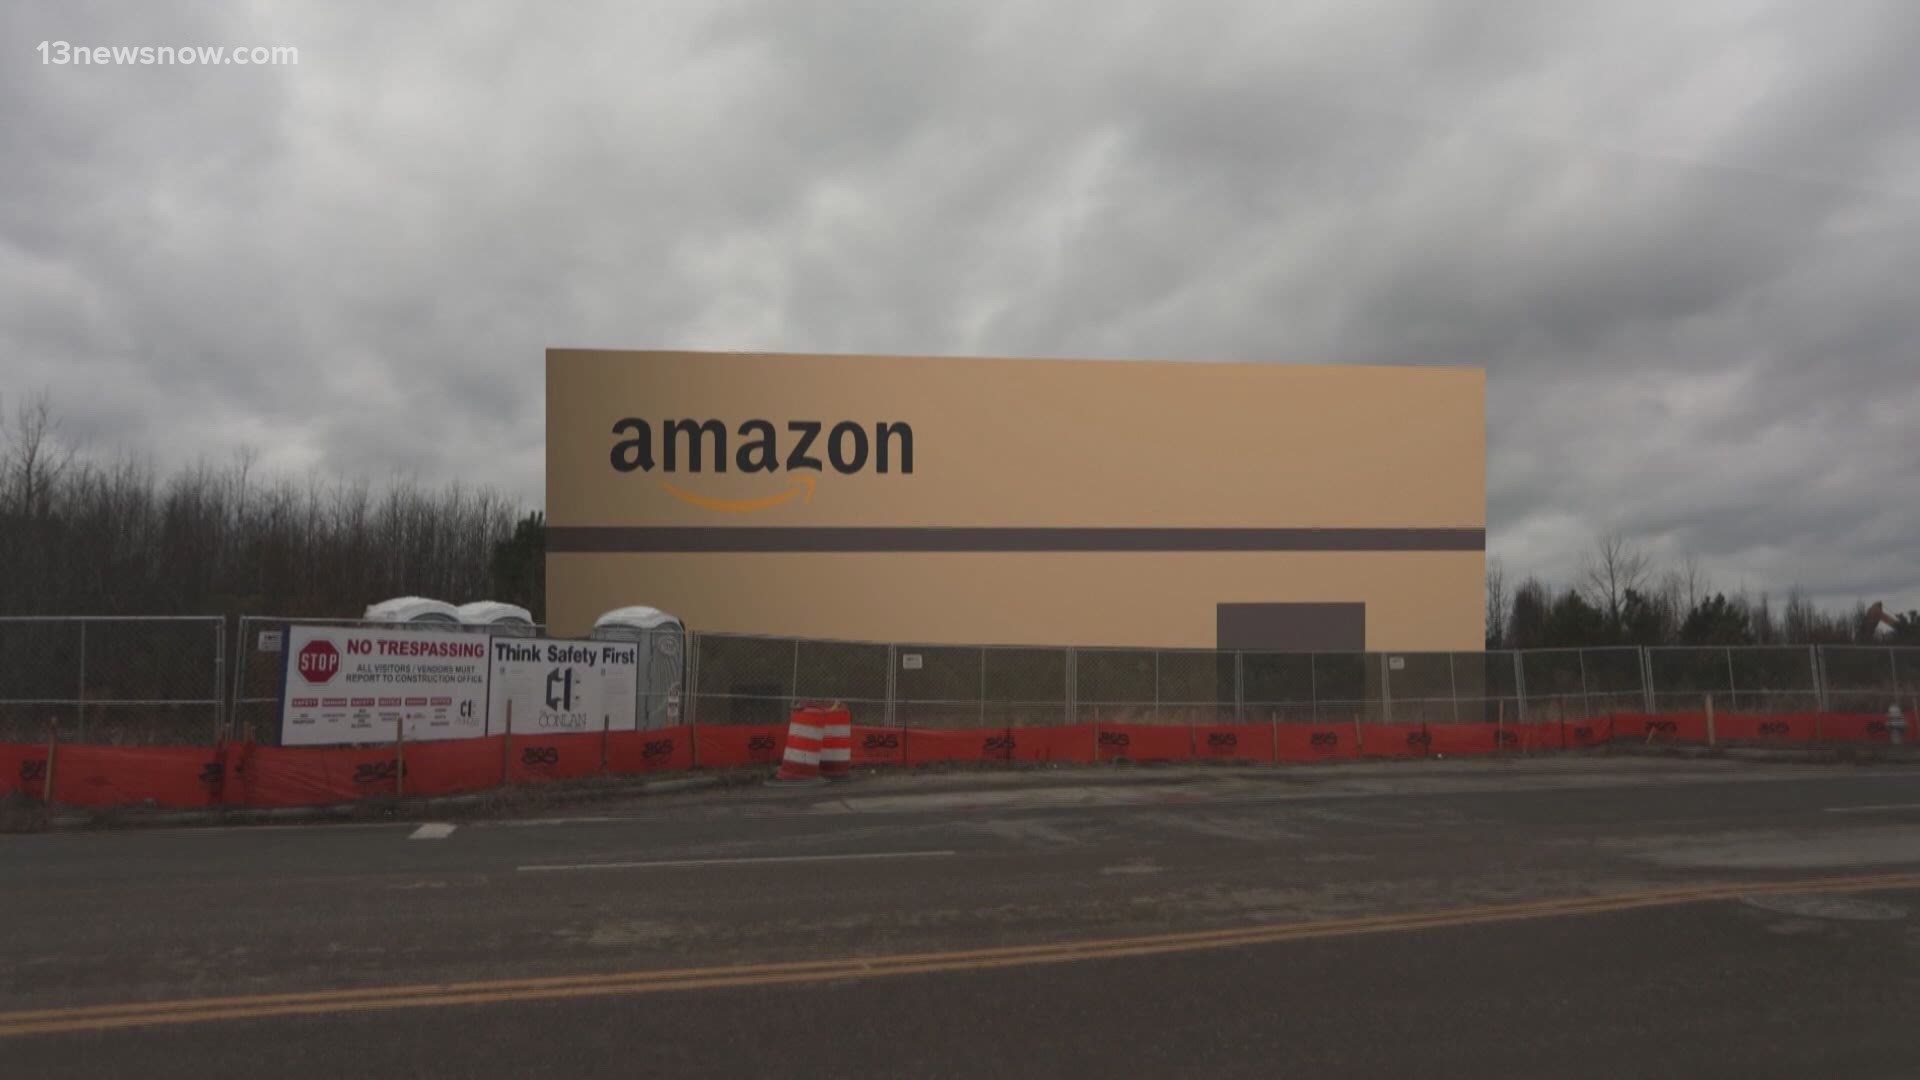 The project was one of two being undertaken locally by Amazon that will together employ 1,500 people.